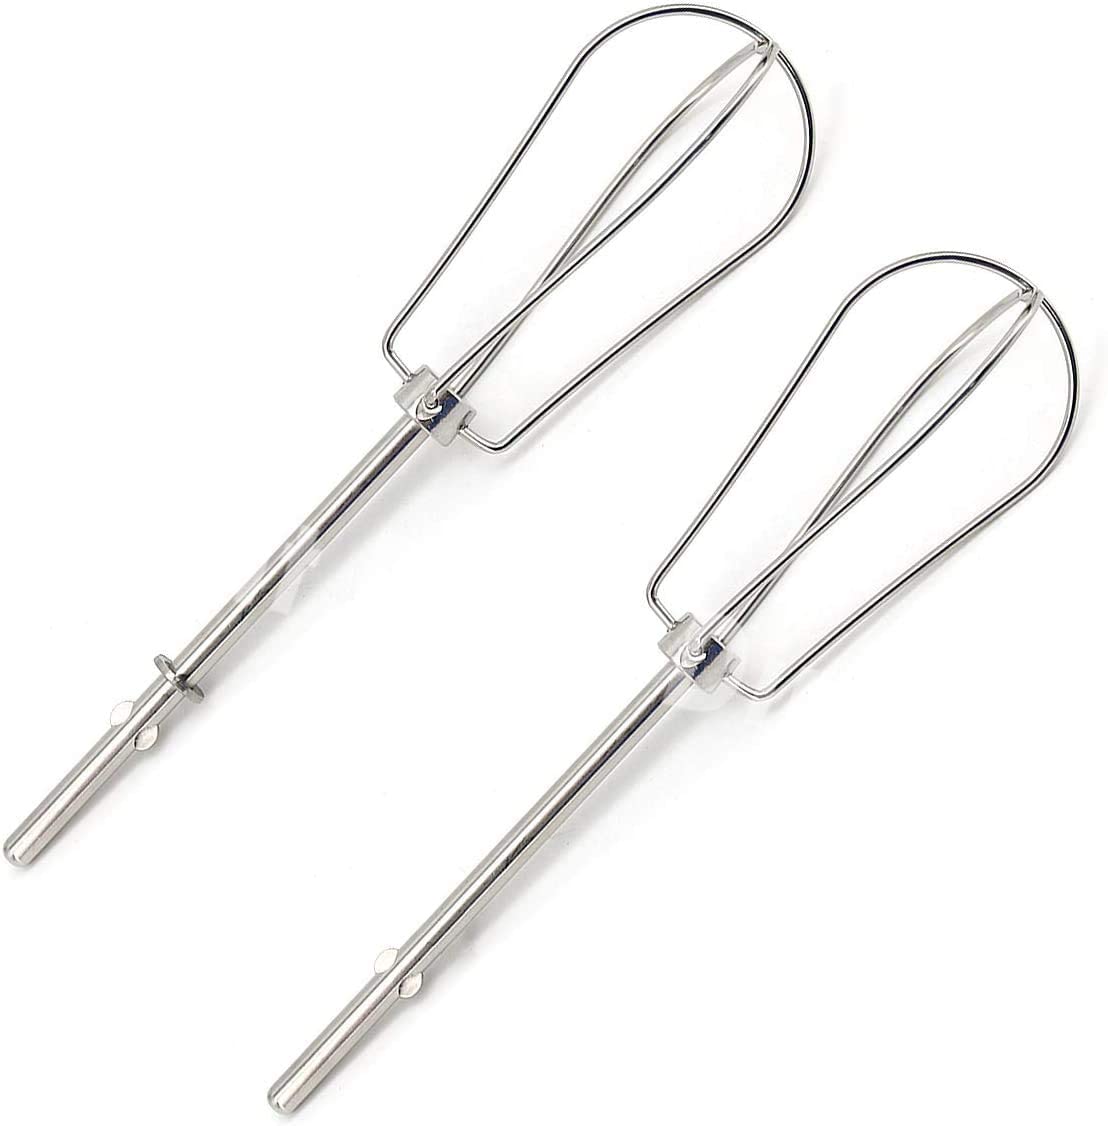 UpStart Components Hand Mixer Beaters Replacement for KitchenAid KHM620ACS0  Mixer, Pack of 2 